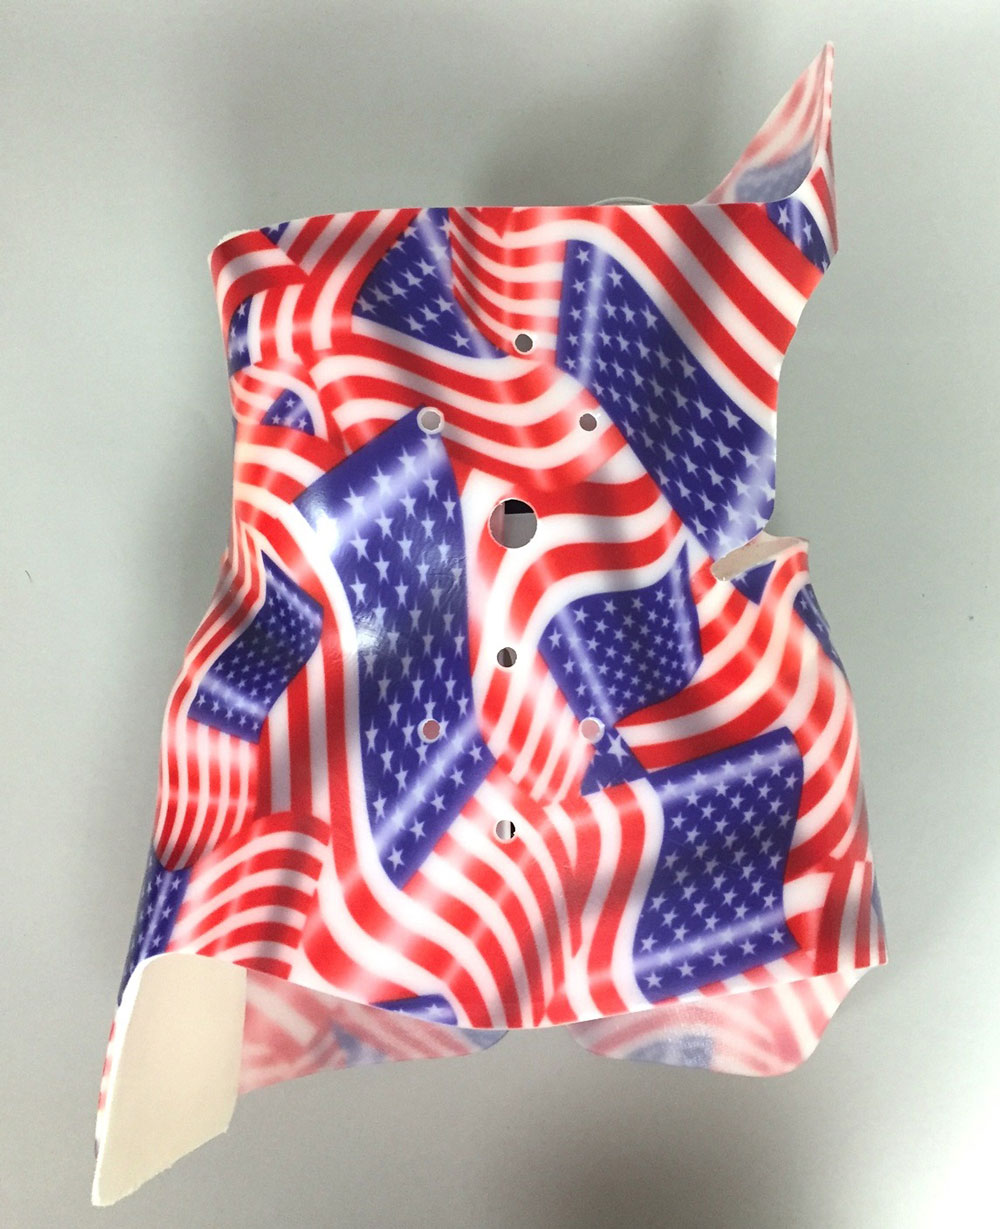 Scoliosis back brace with American flag design